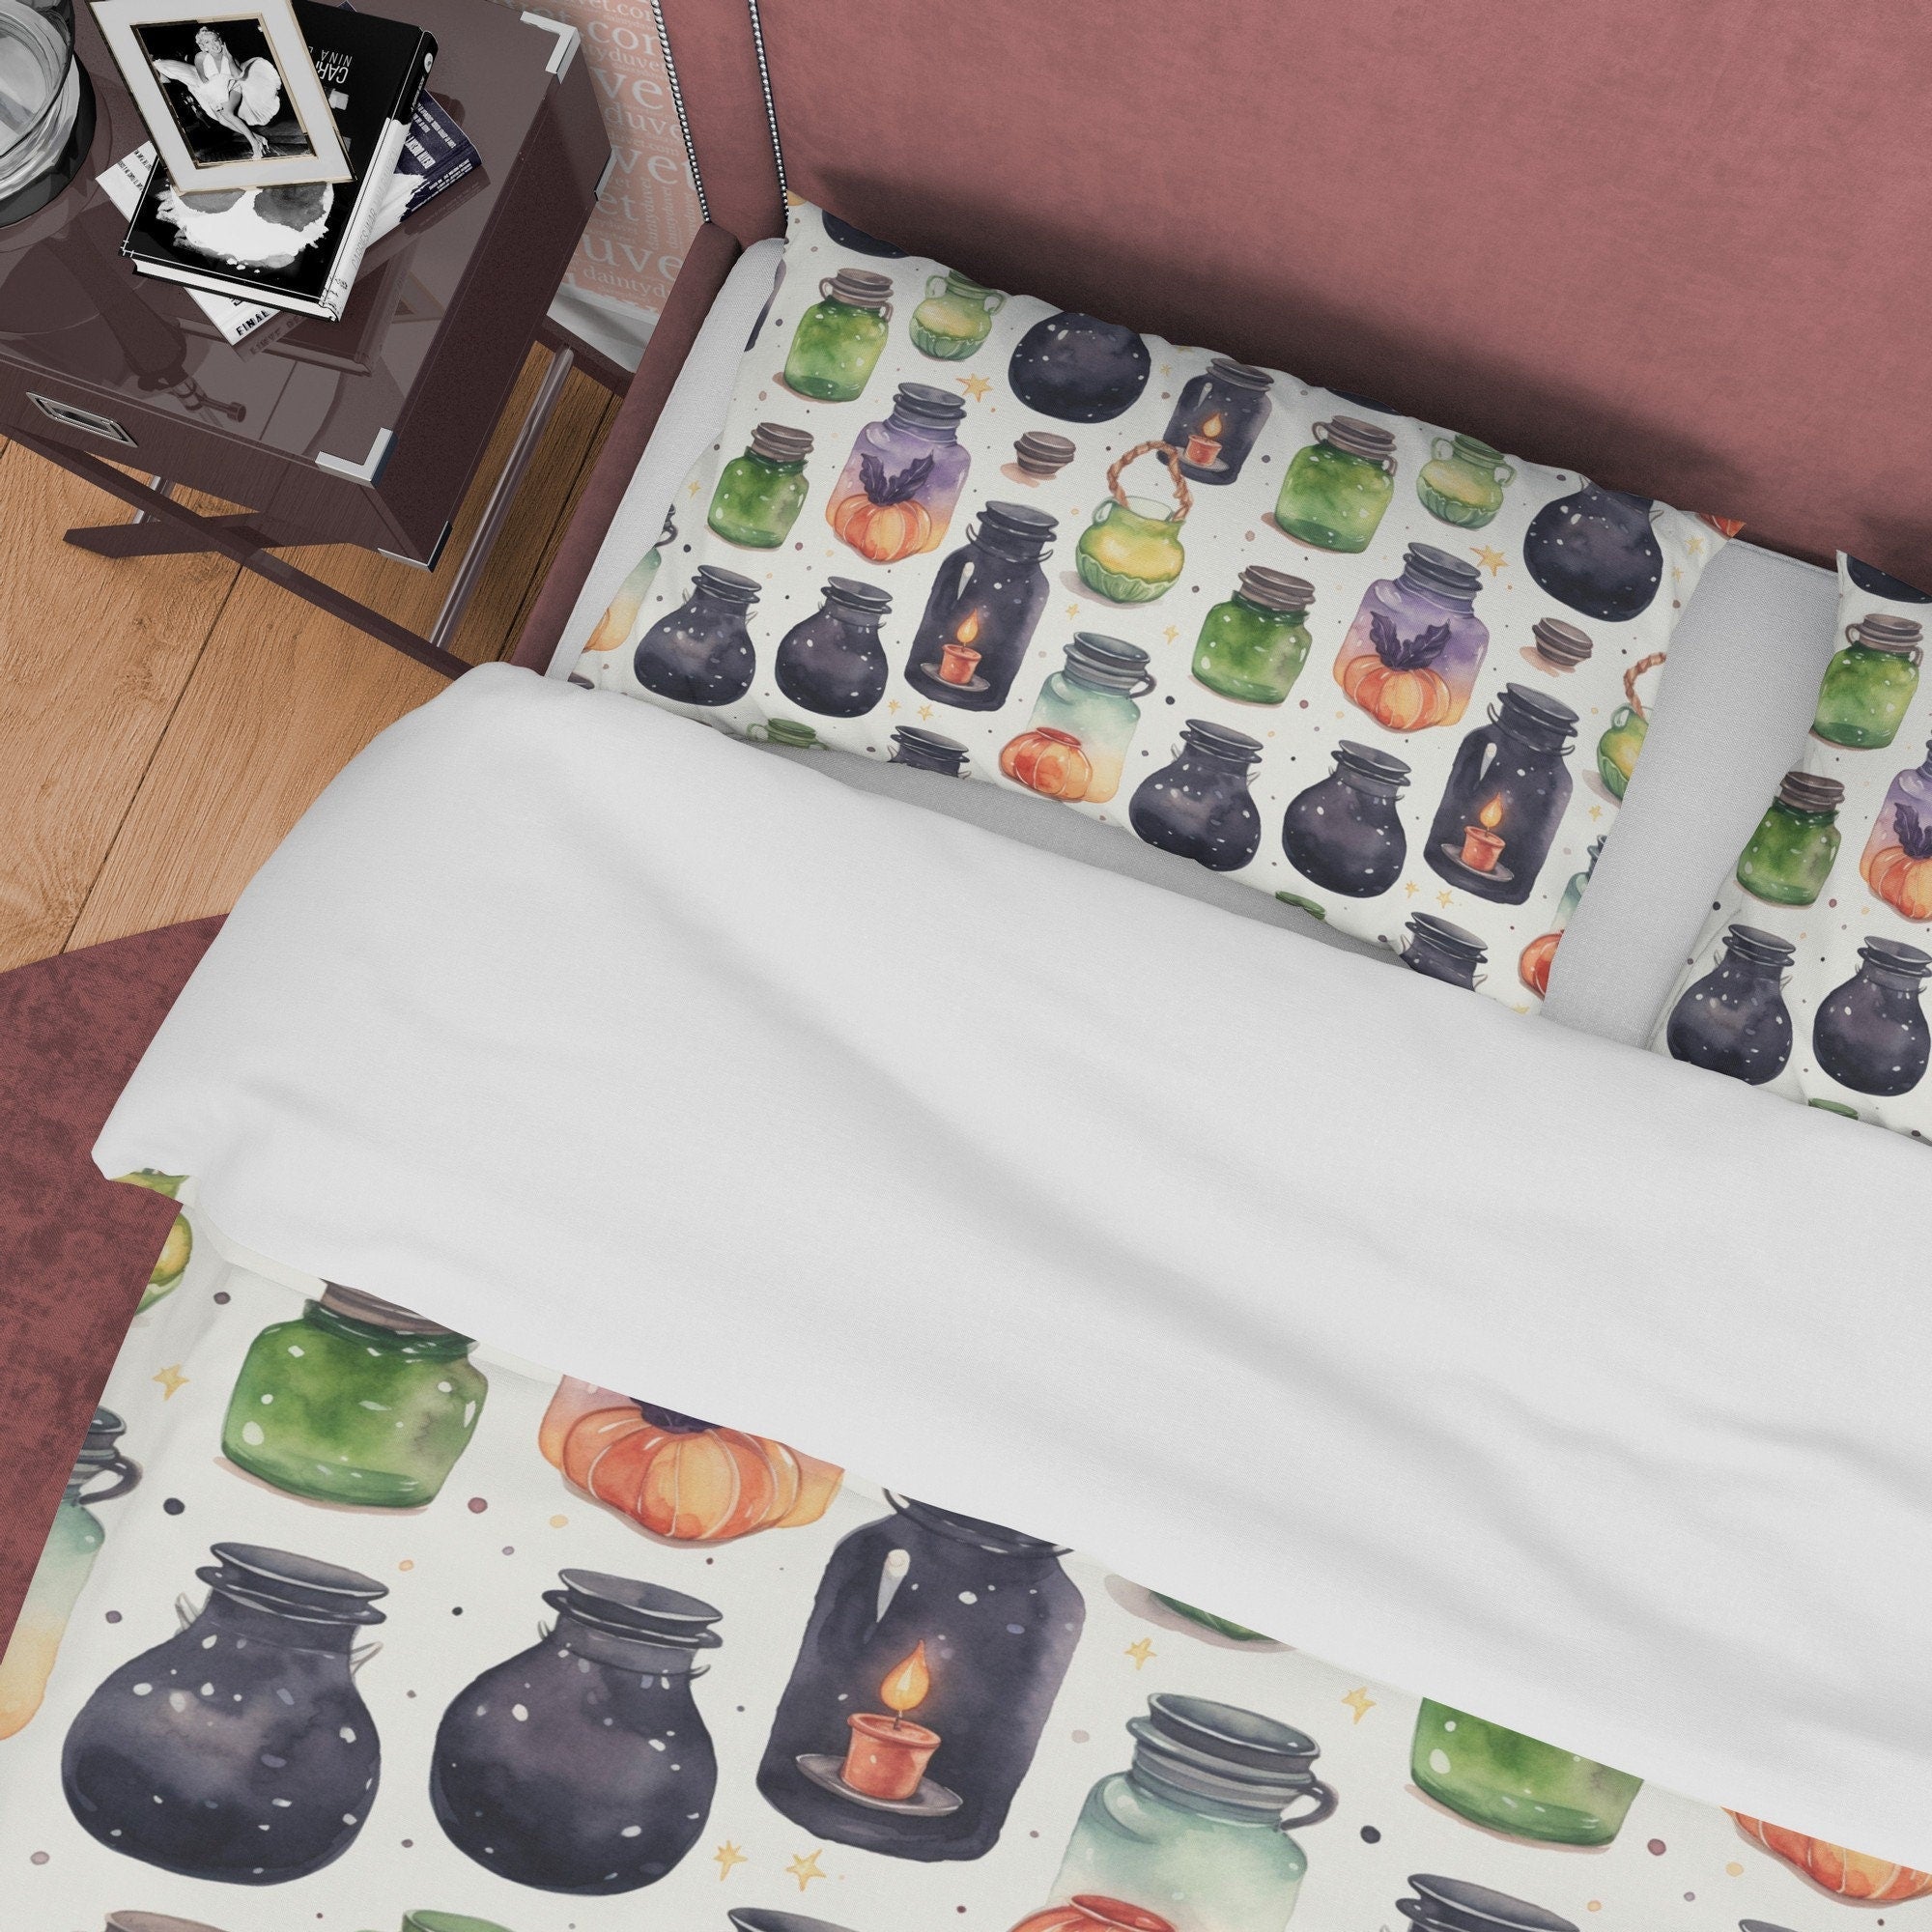 Witch Craft Jar Duvet Cover Set, Unique Spooky Potion Blanket Cover Aesthetic Zipper Bedding, Halloween Trick Or Treat Kid's Room Decor